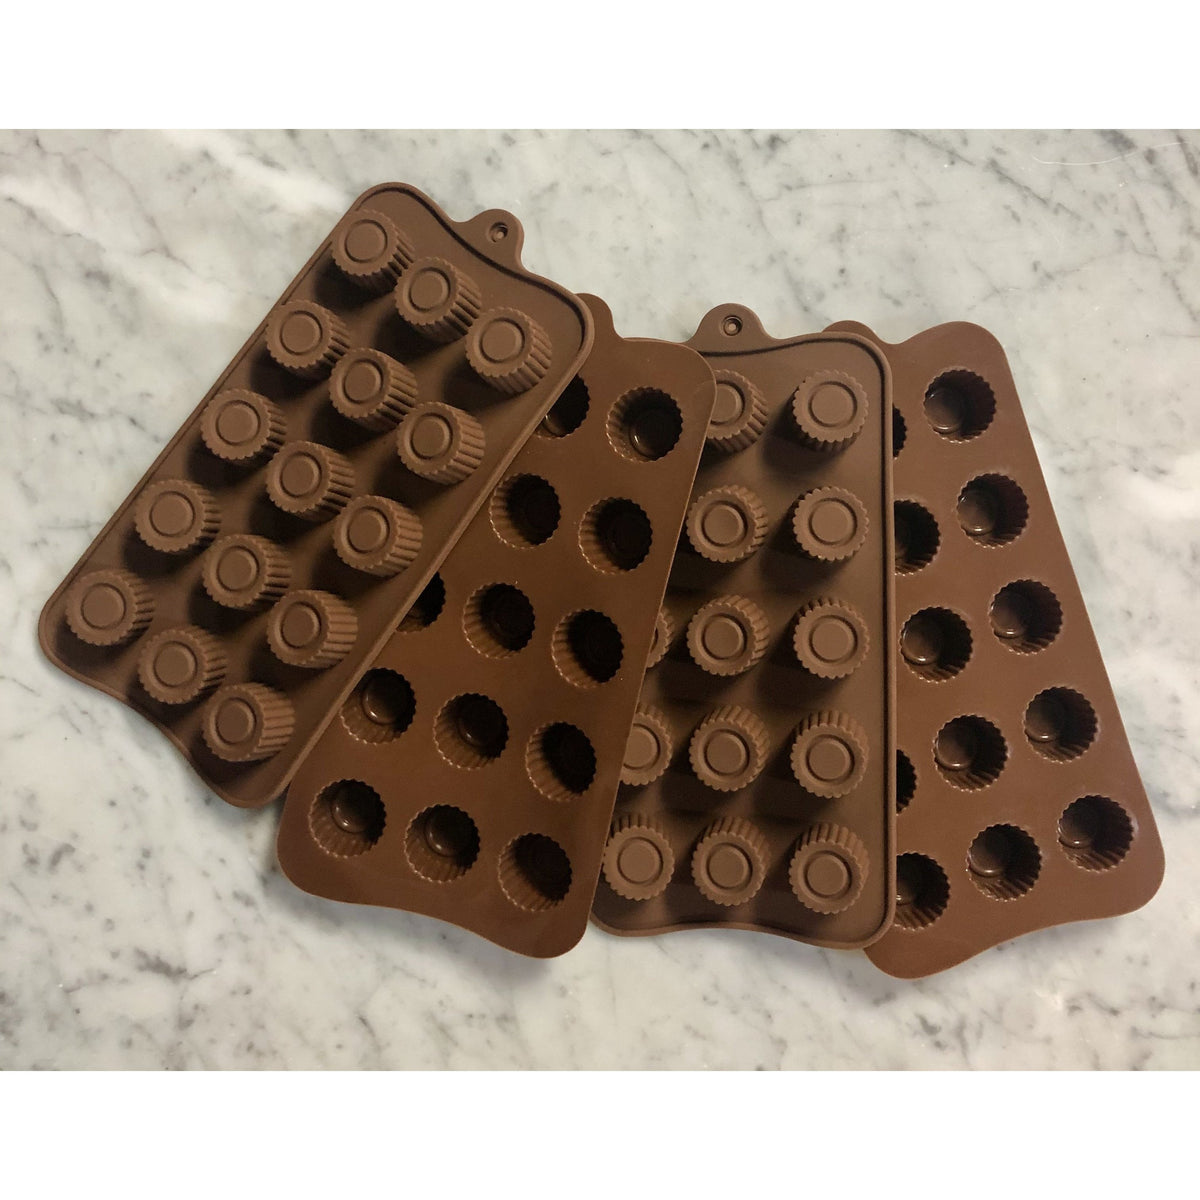 Silicon Break-Apart Chocolate Molds (4 pack) – Wilderness Poets